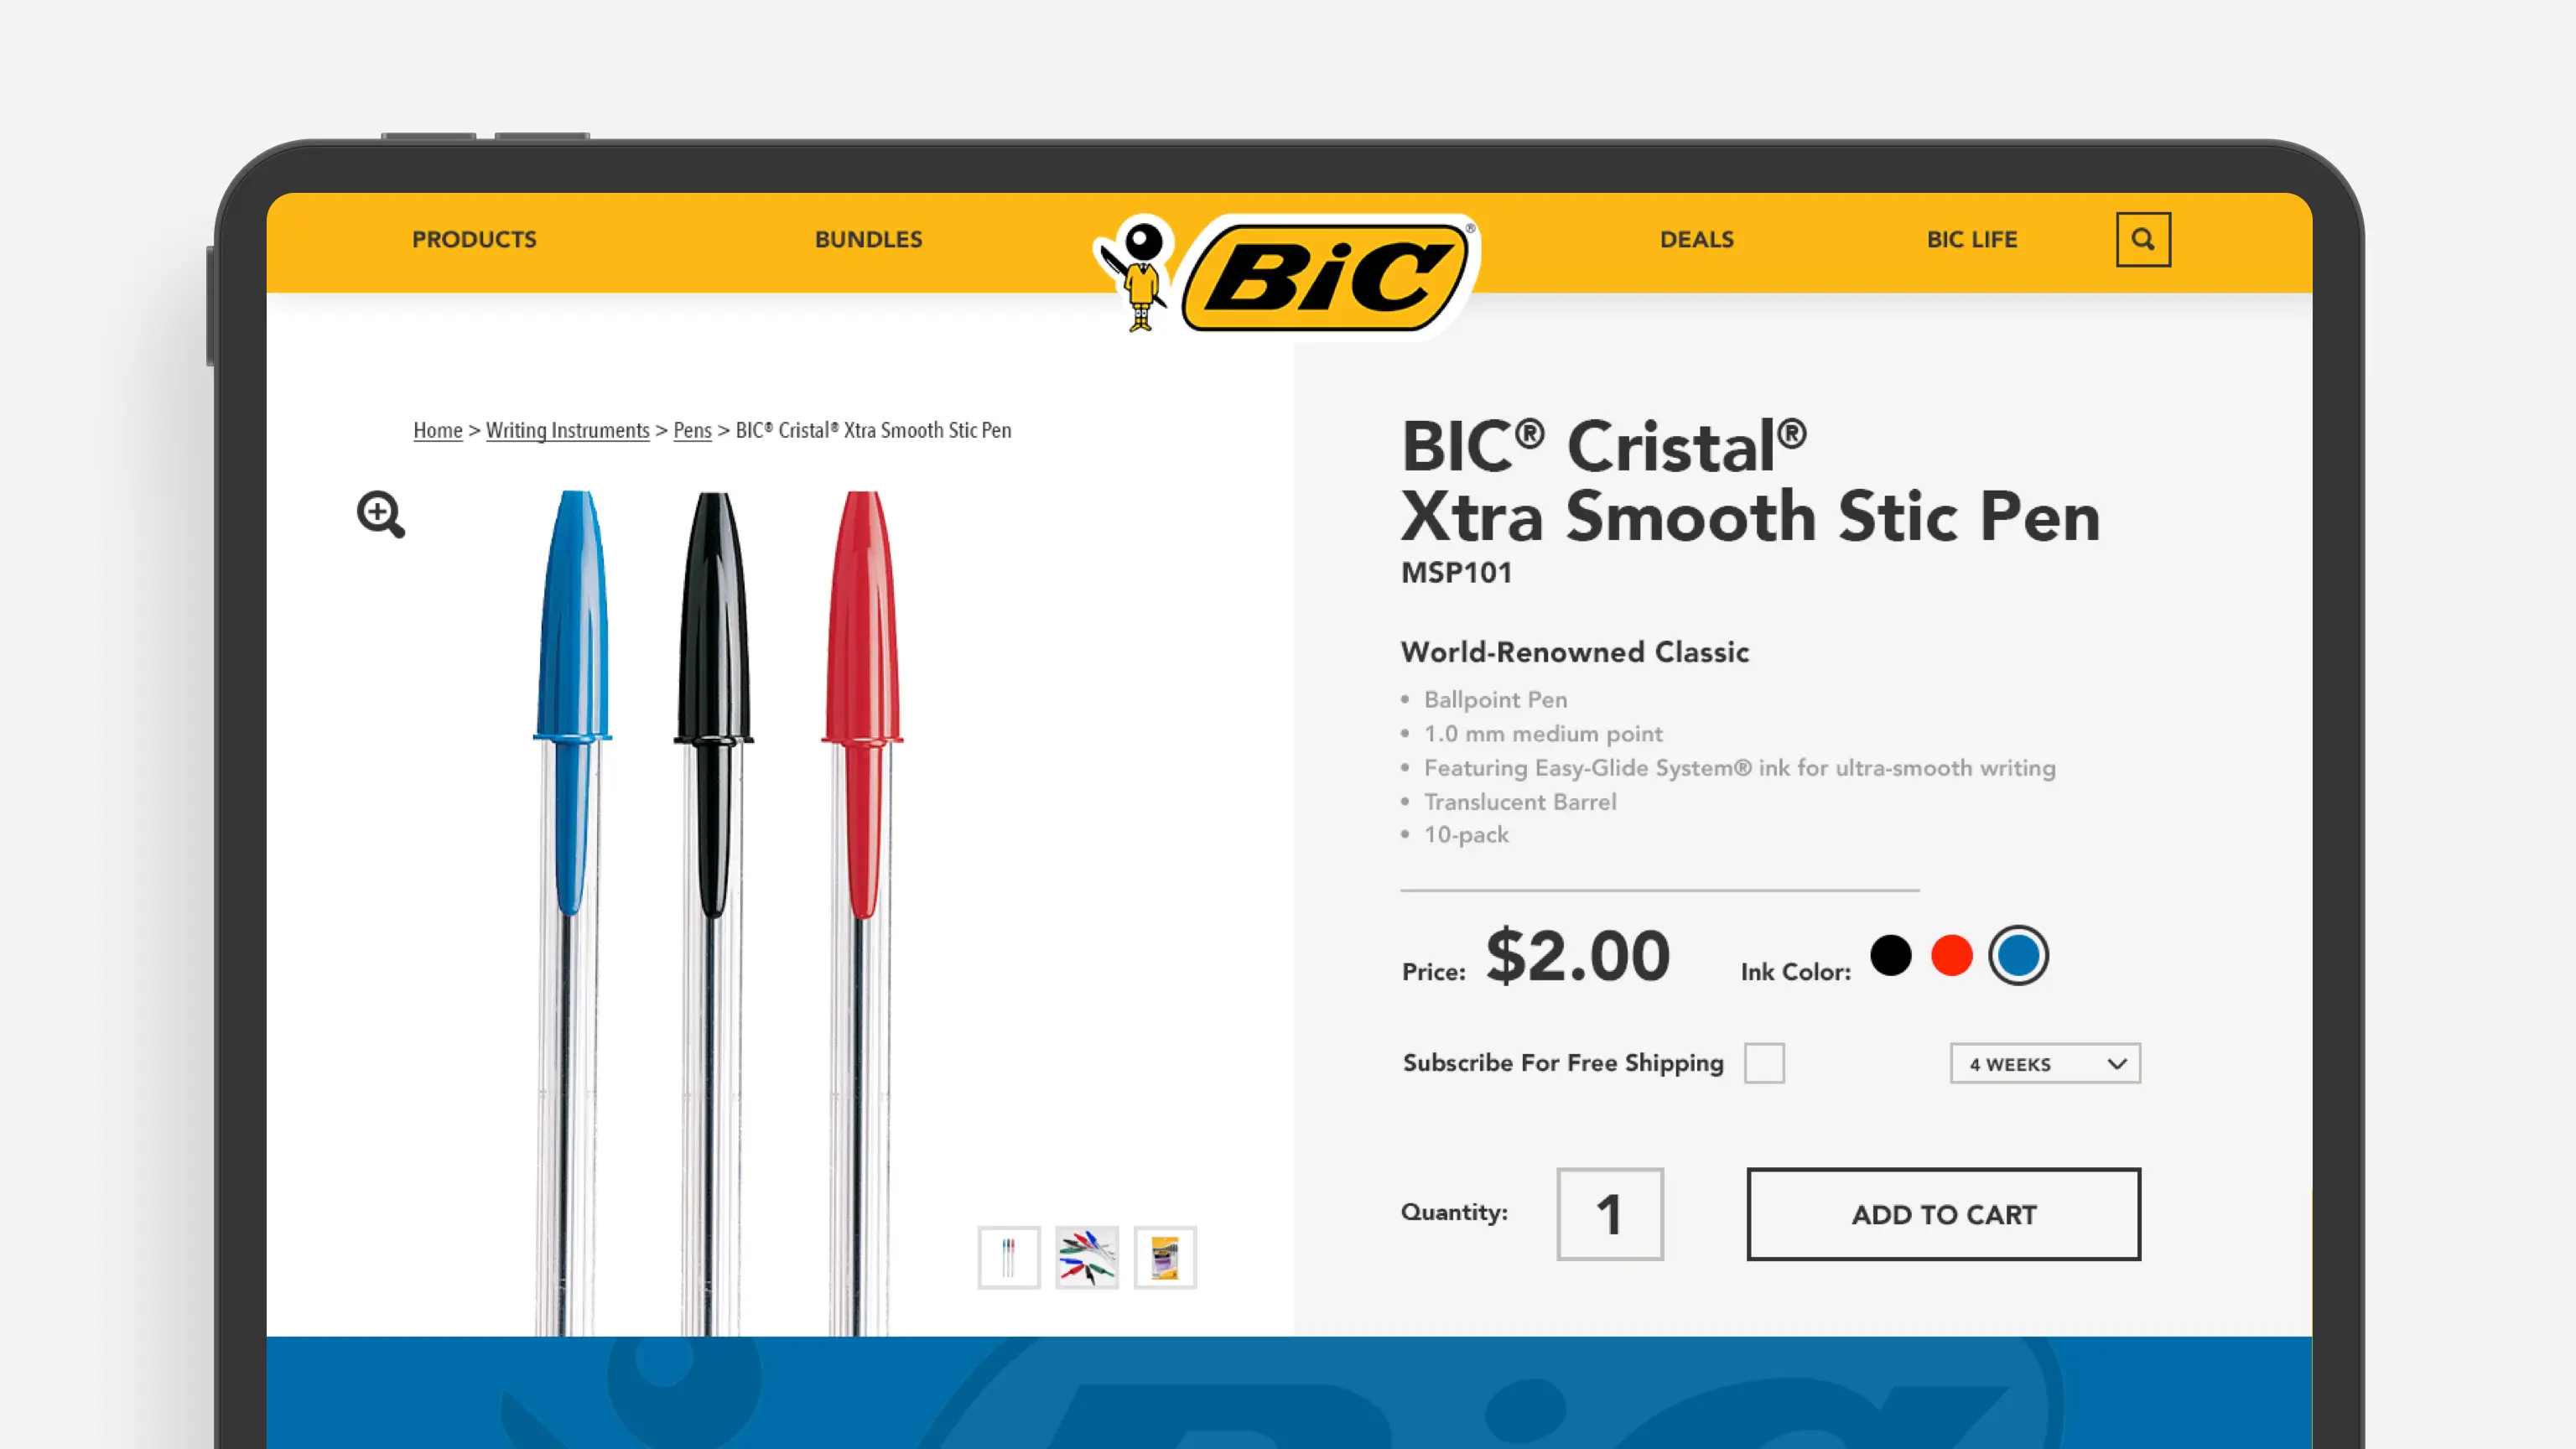 Screenshot of BIC Cristil Xtra Smooth Stic Pen product page